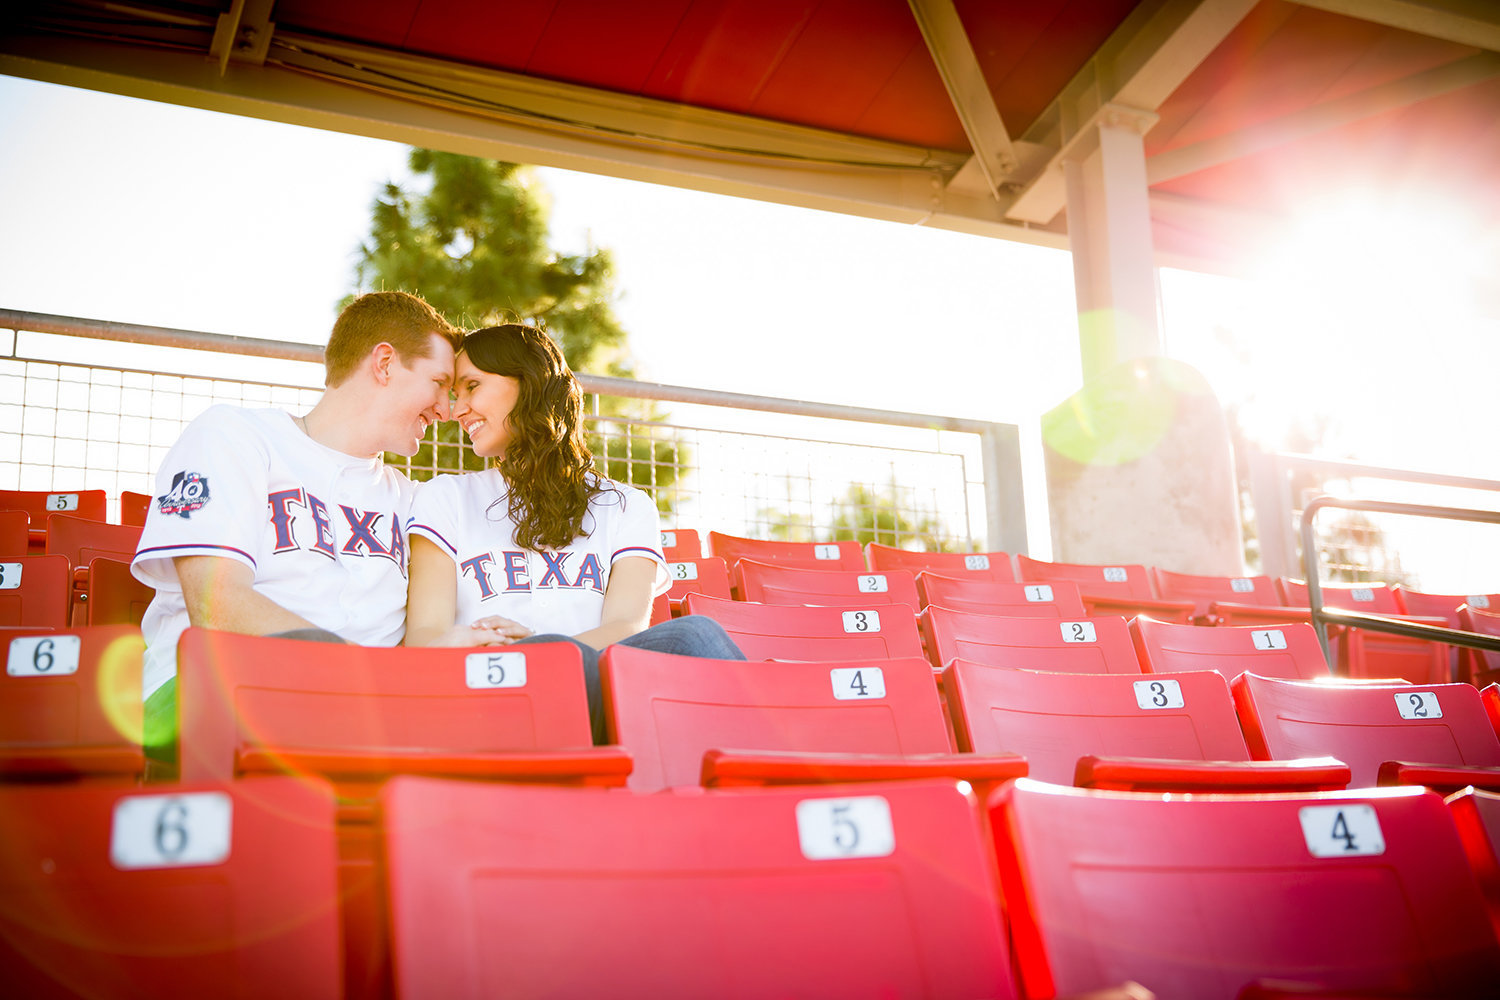 San Diego State engagement photos cute couple at stadium